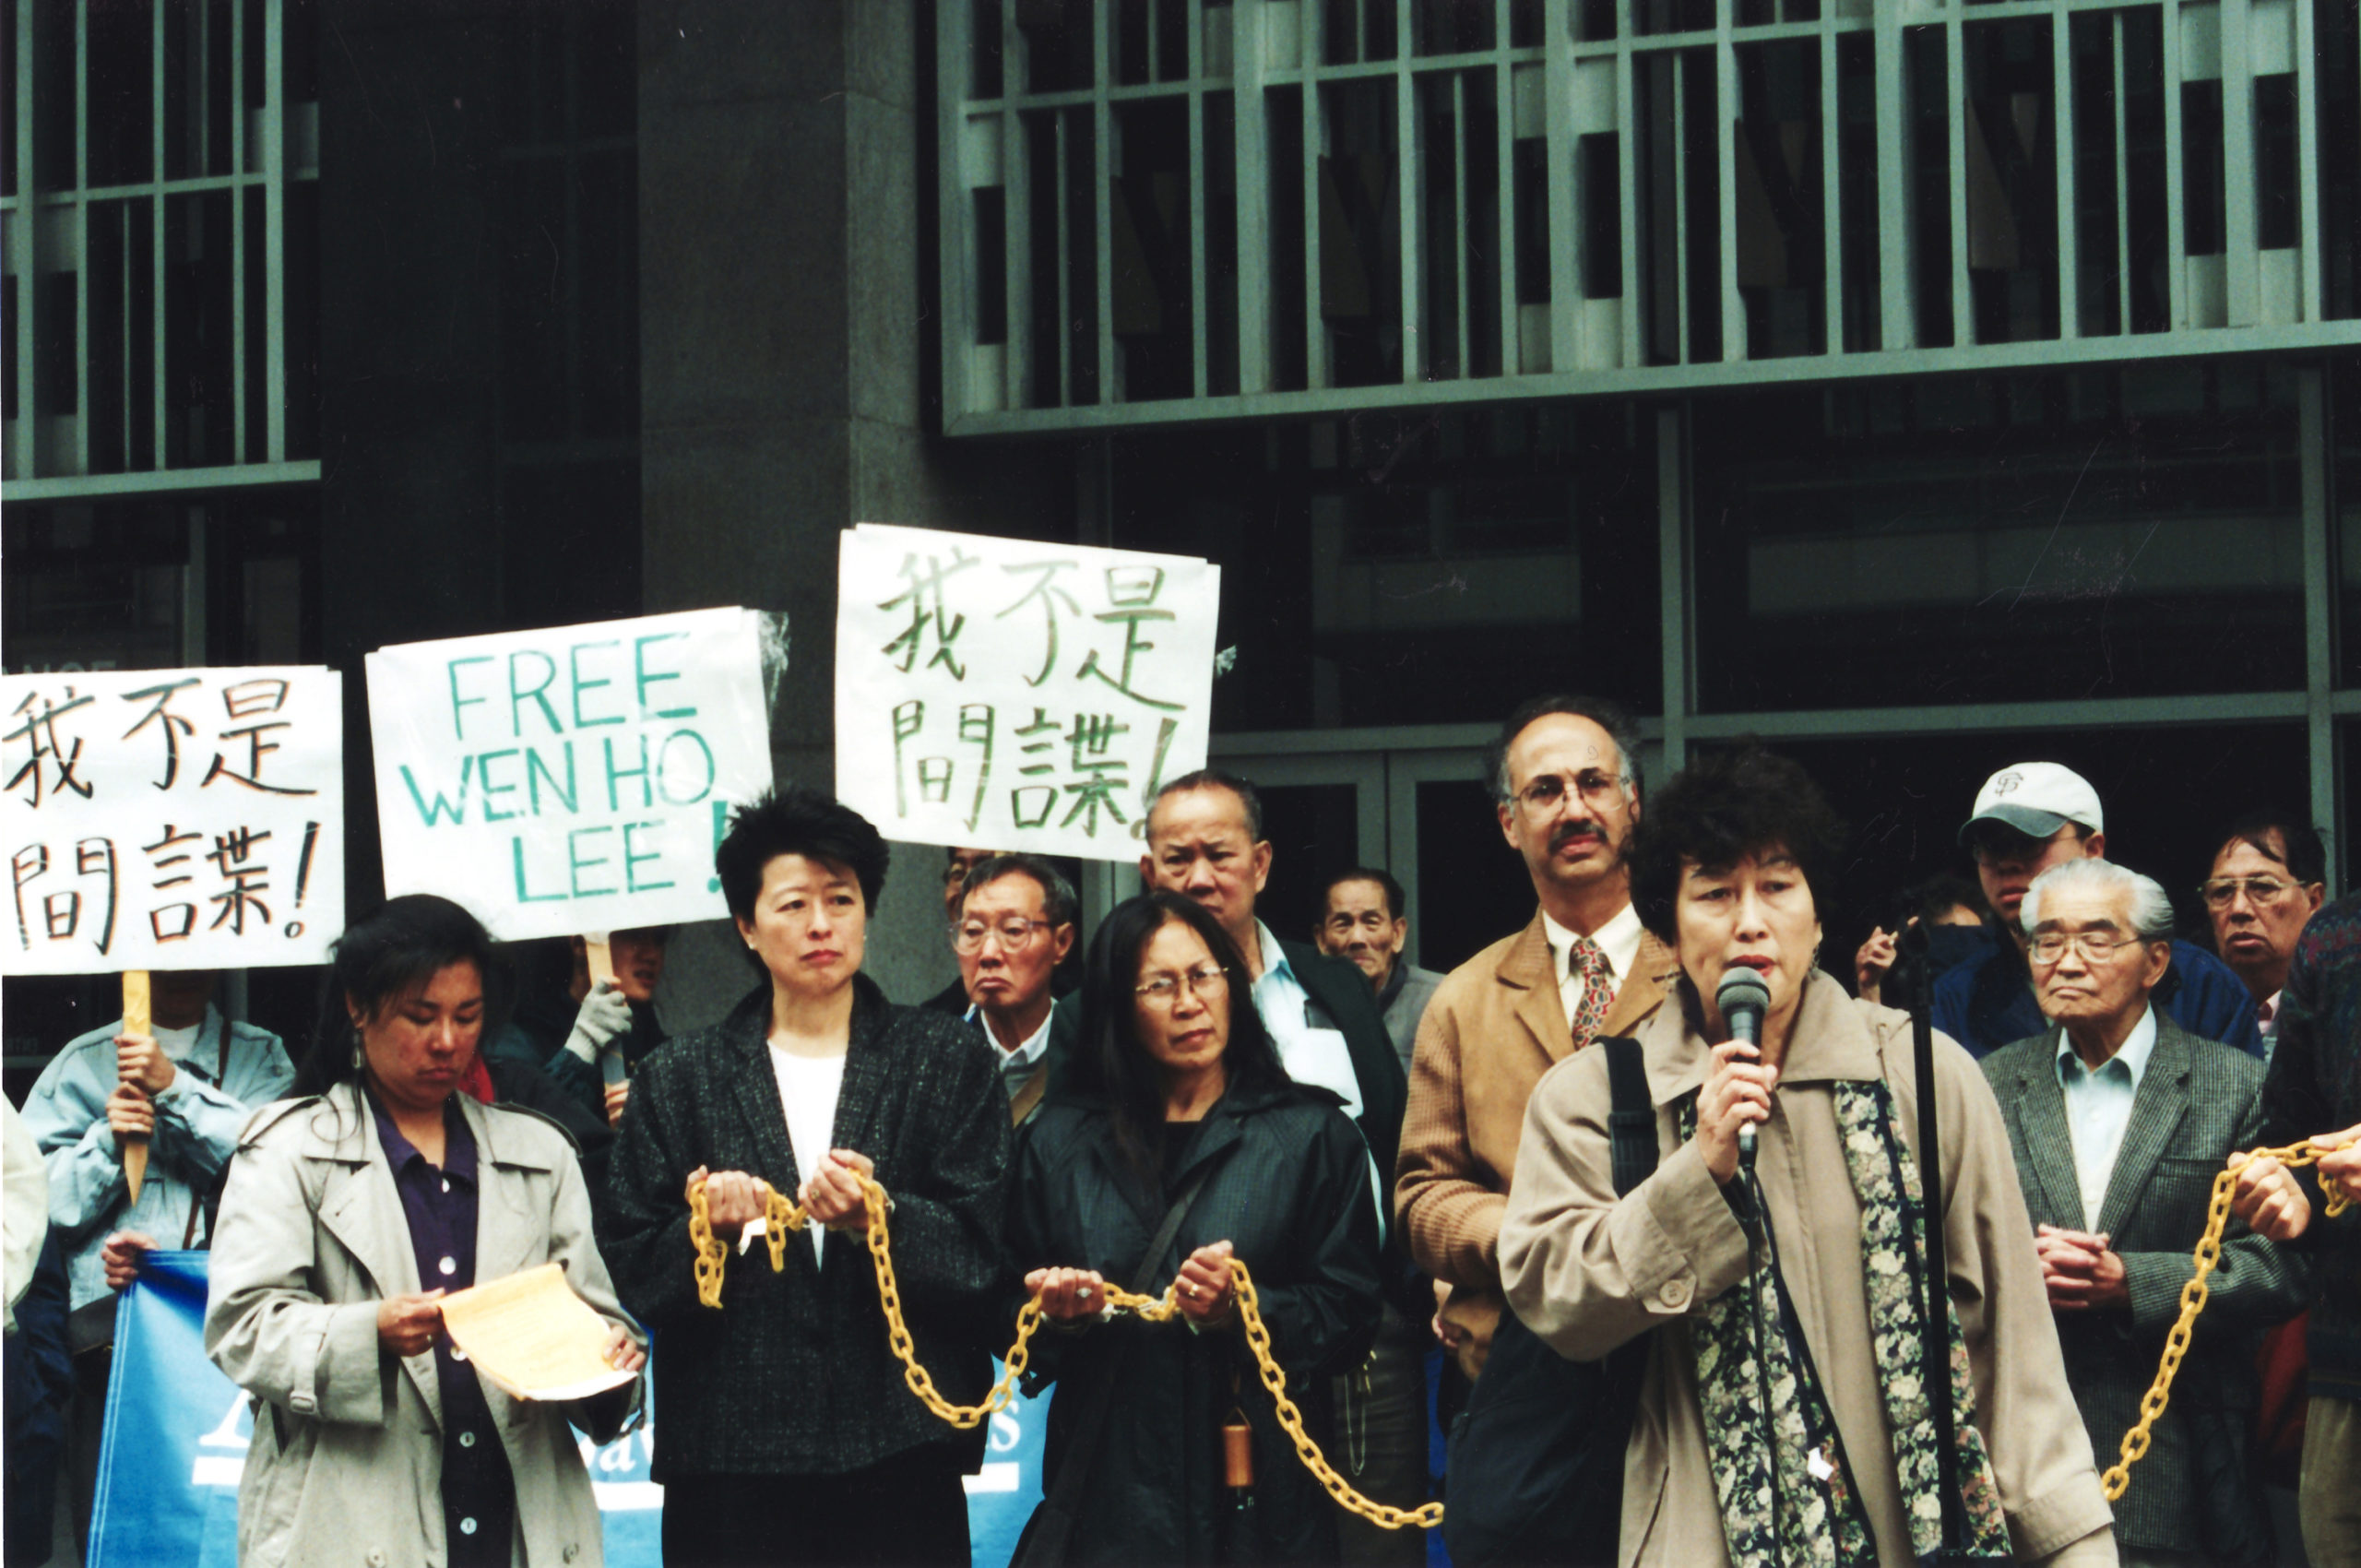 CAA and allies support Wen Ho Lee in 2000